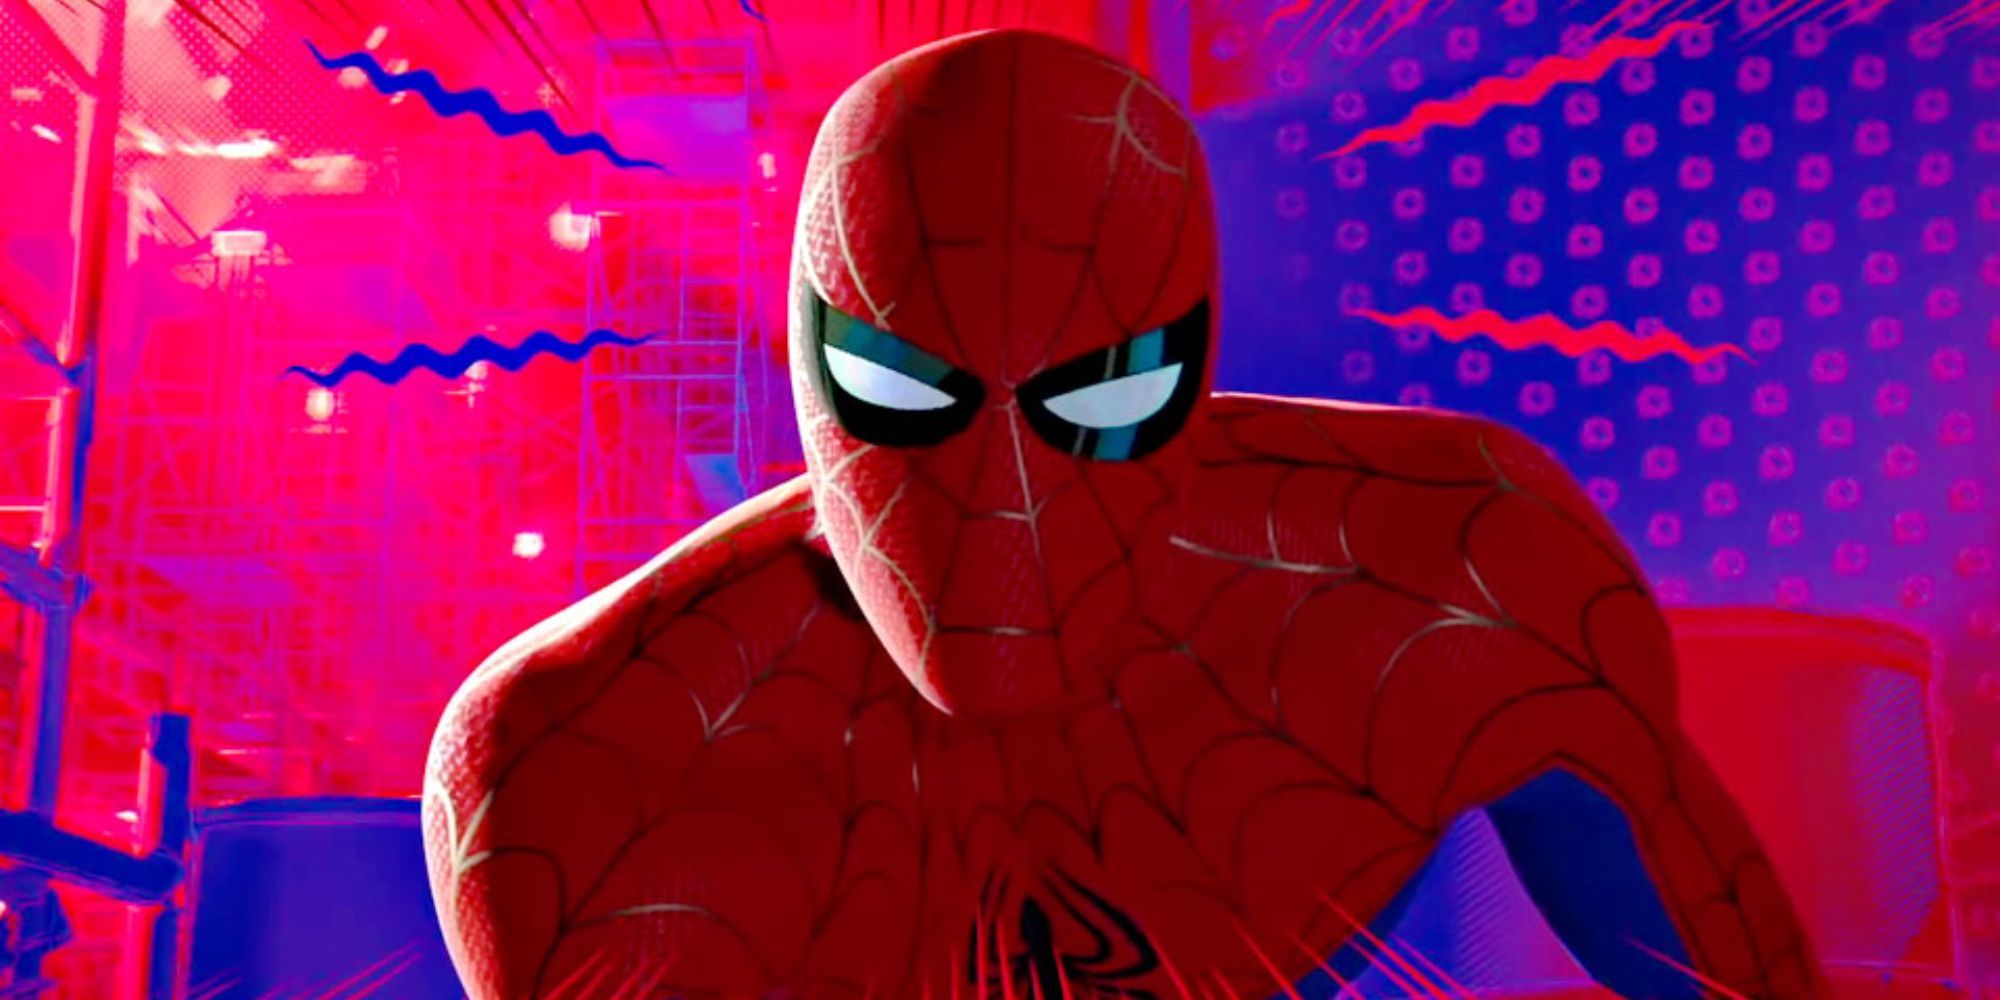 Spider-Man squinting in Spider-Man: Into the Spiderverse.